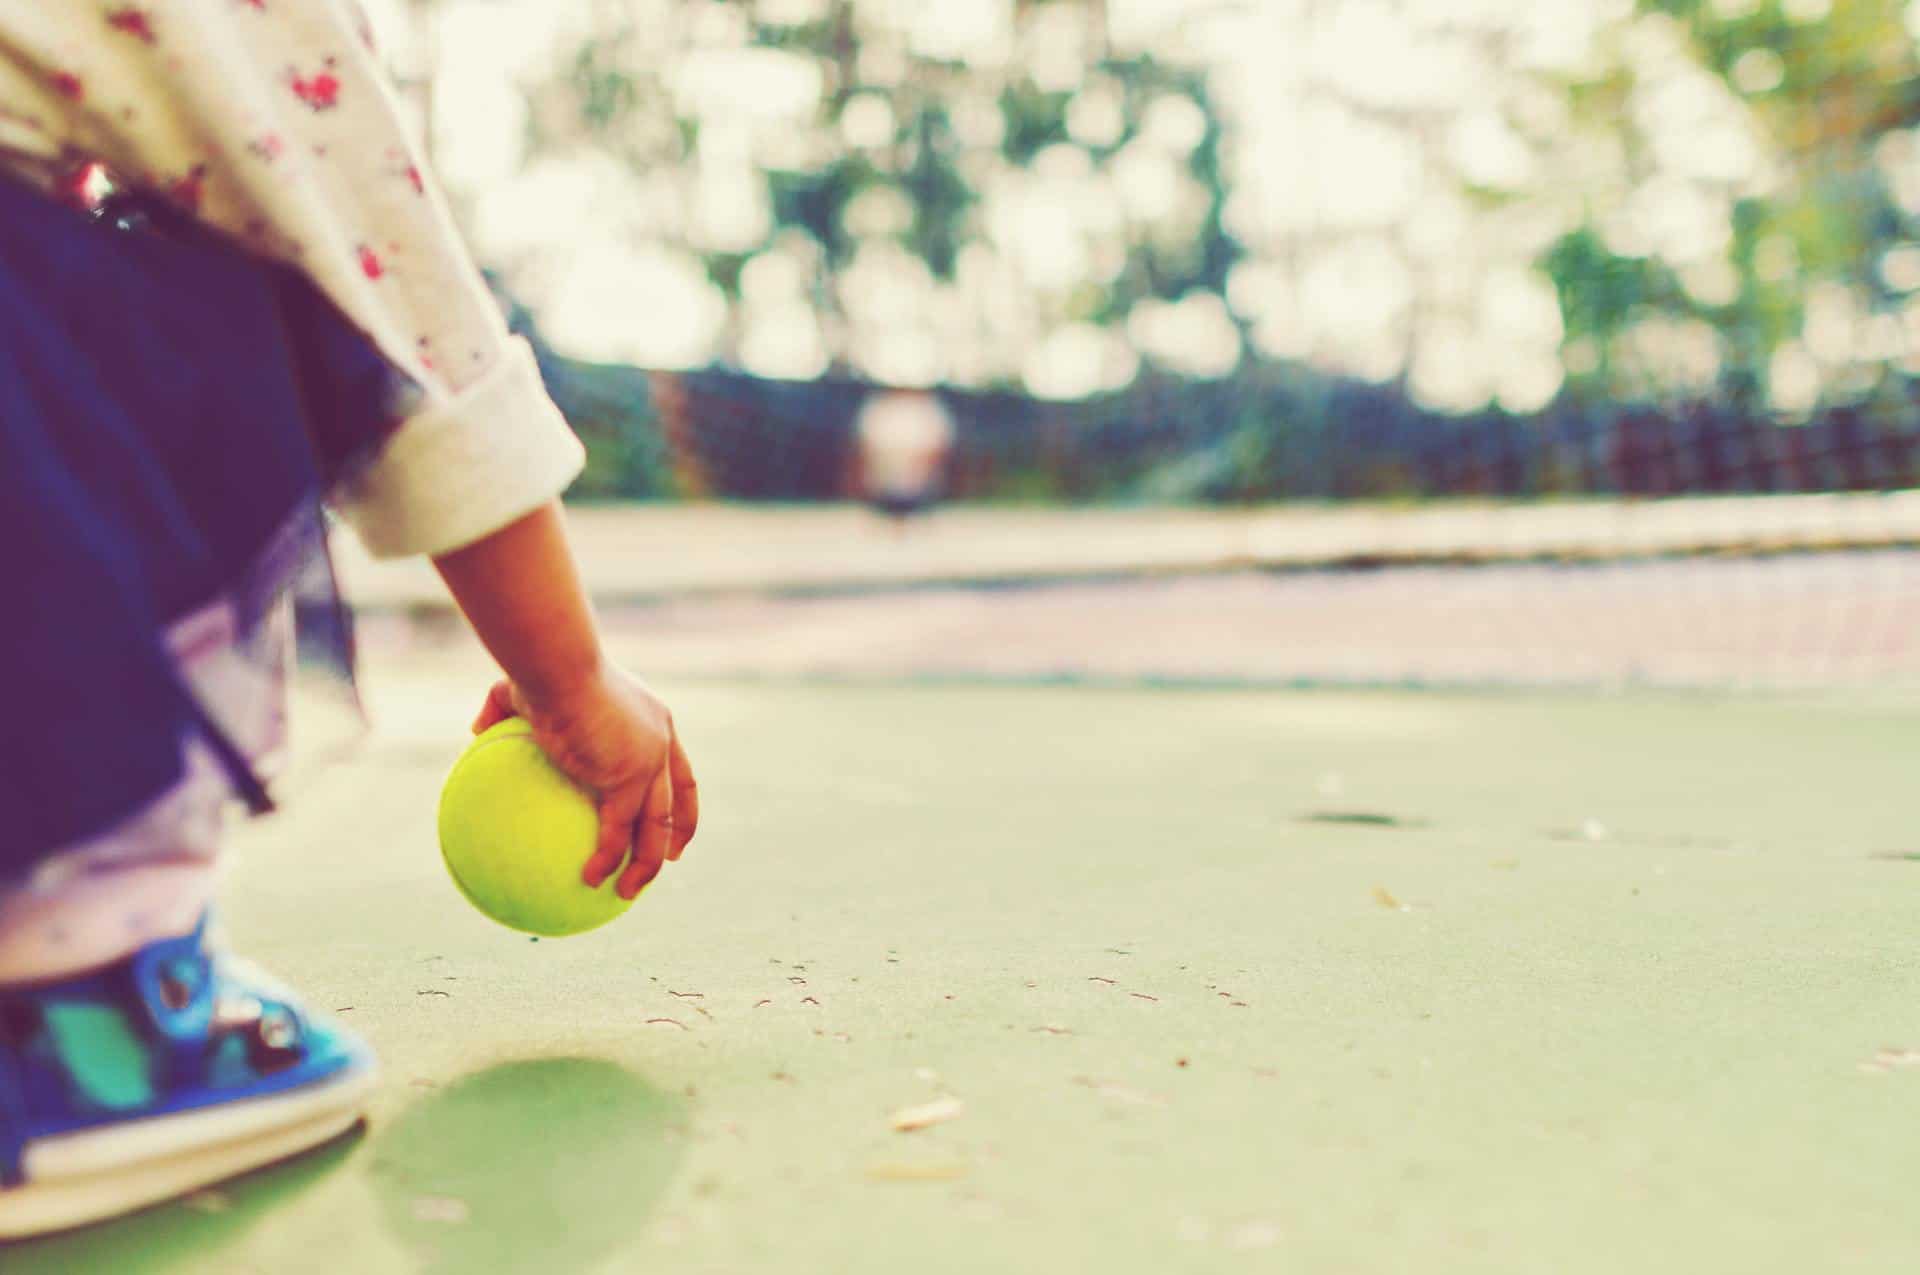 Sports lessons for a toddler who already has everything